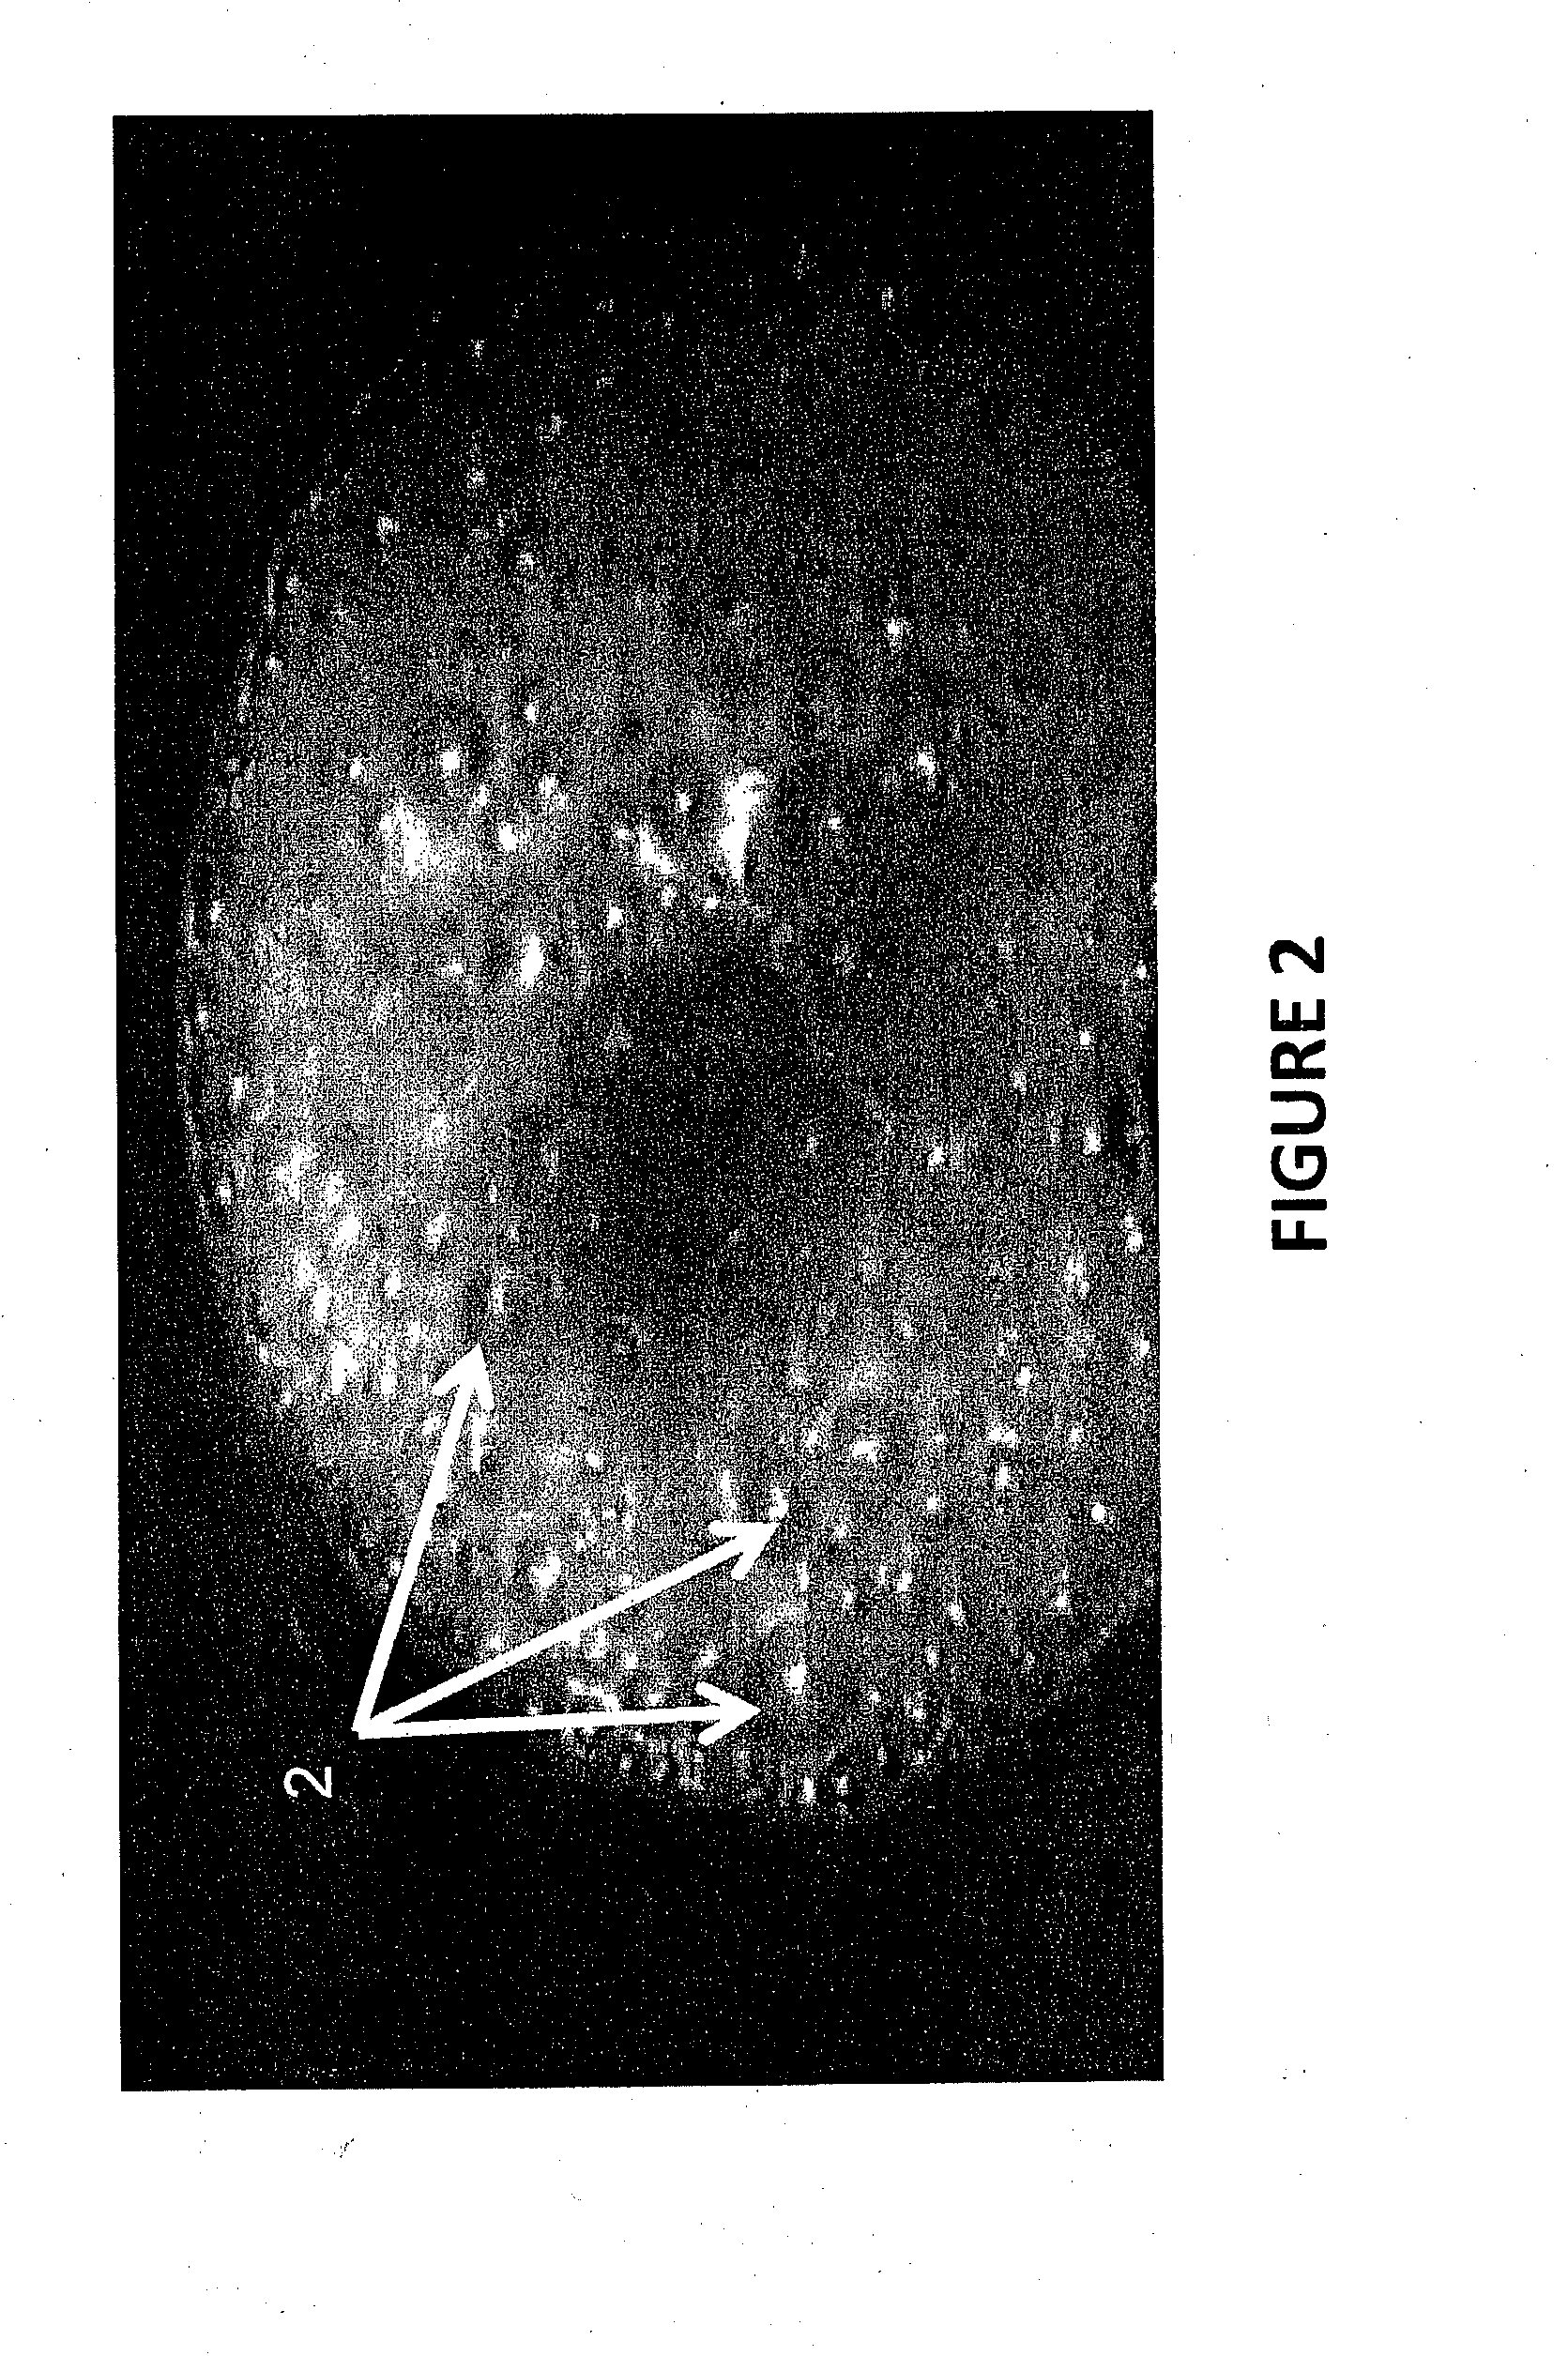 Compositions and methods for enhanced hydrocarbon recovery